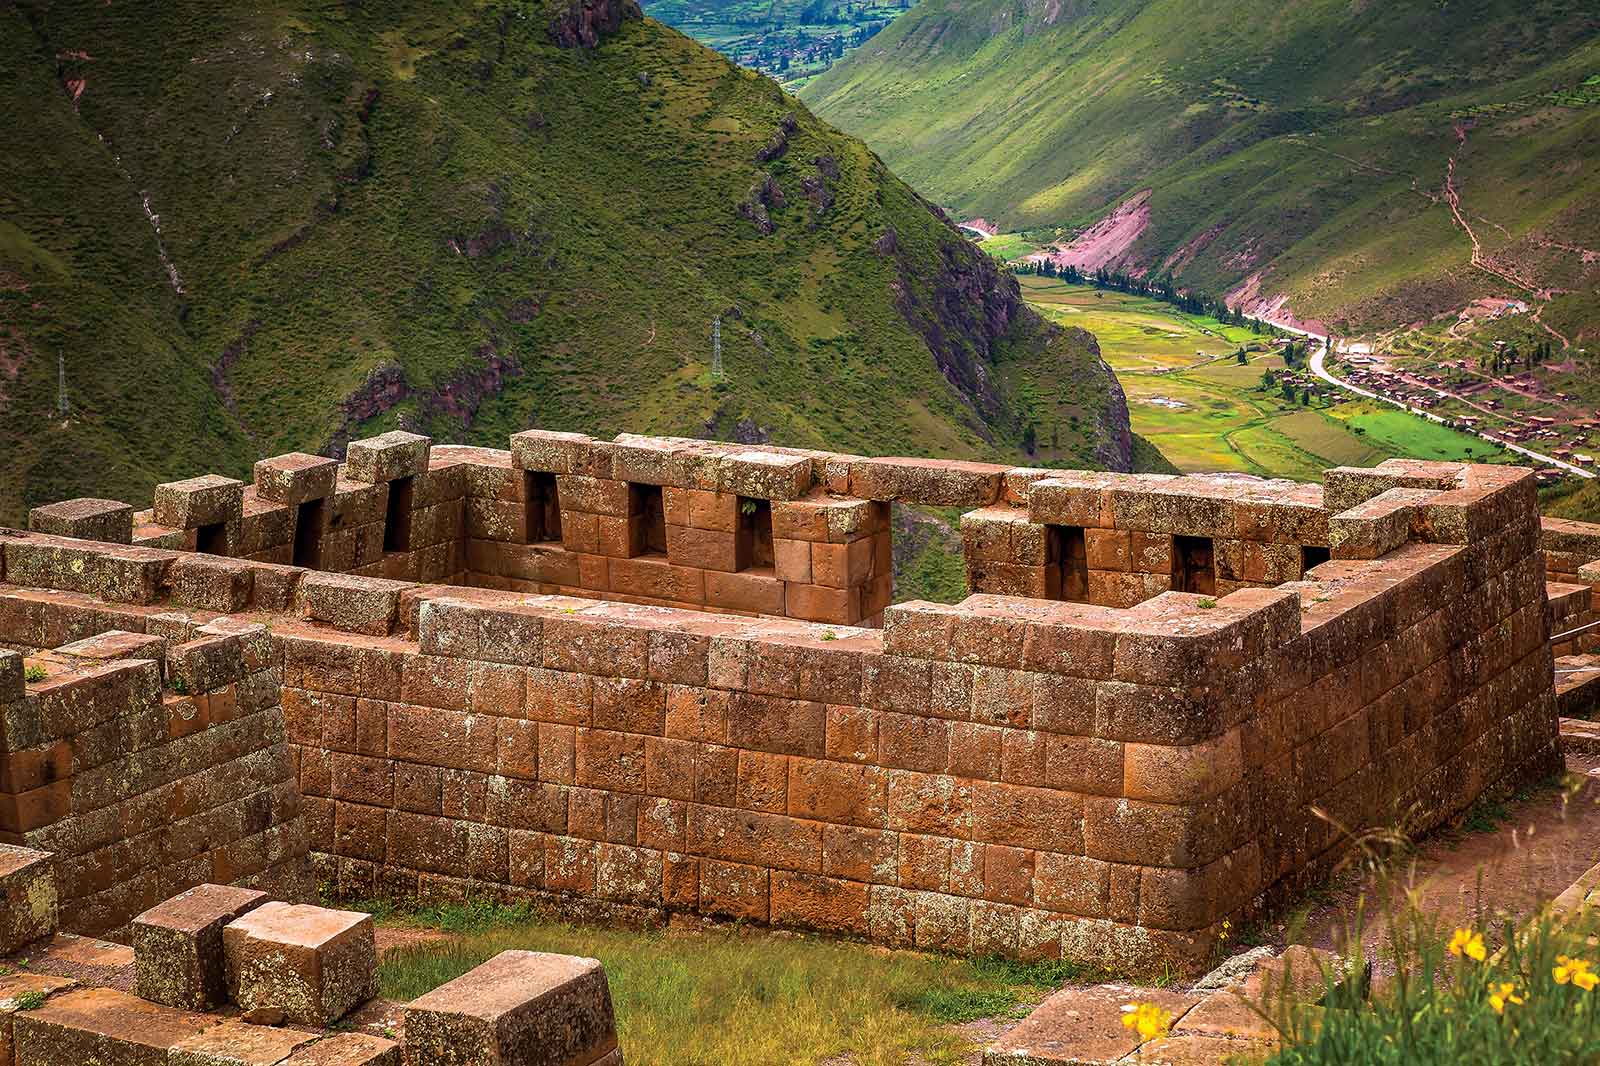 Full day tour in the Sacred Valley